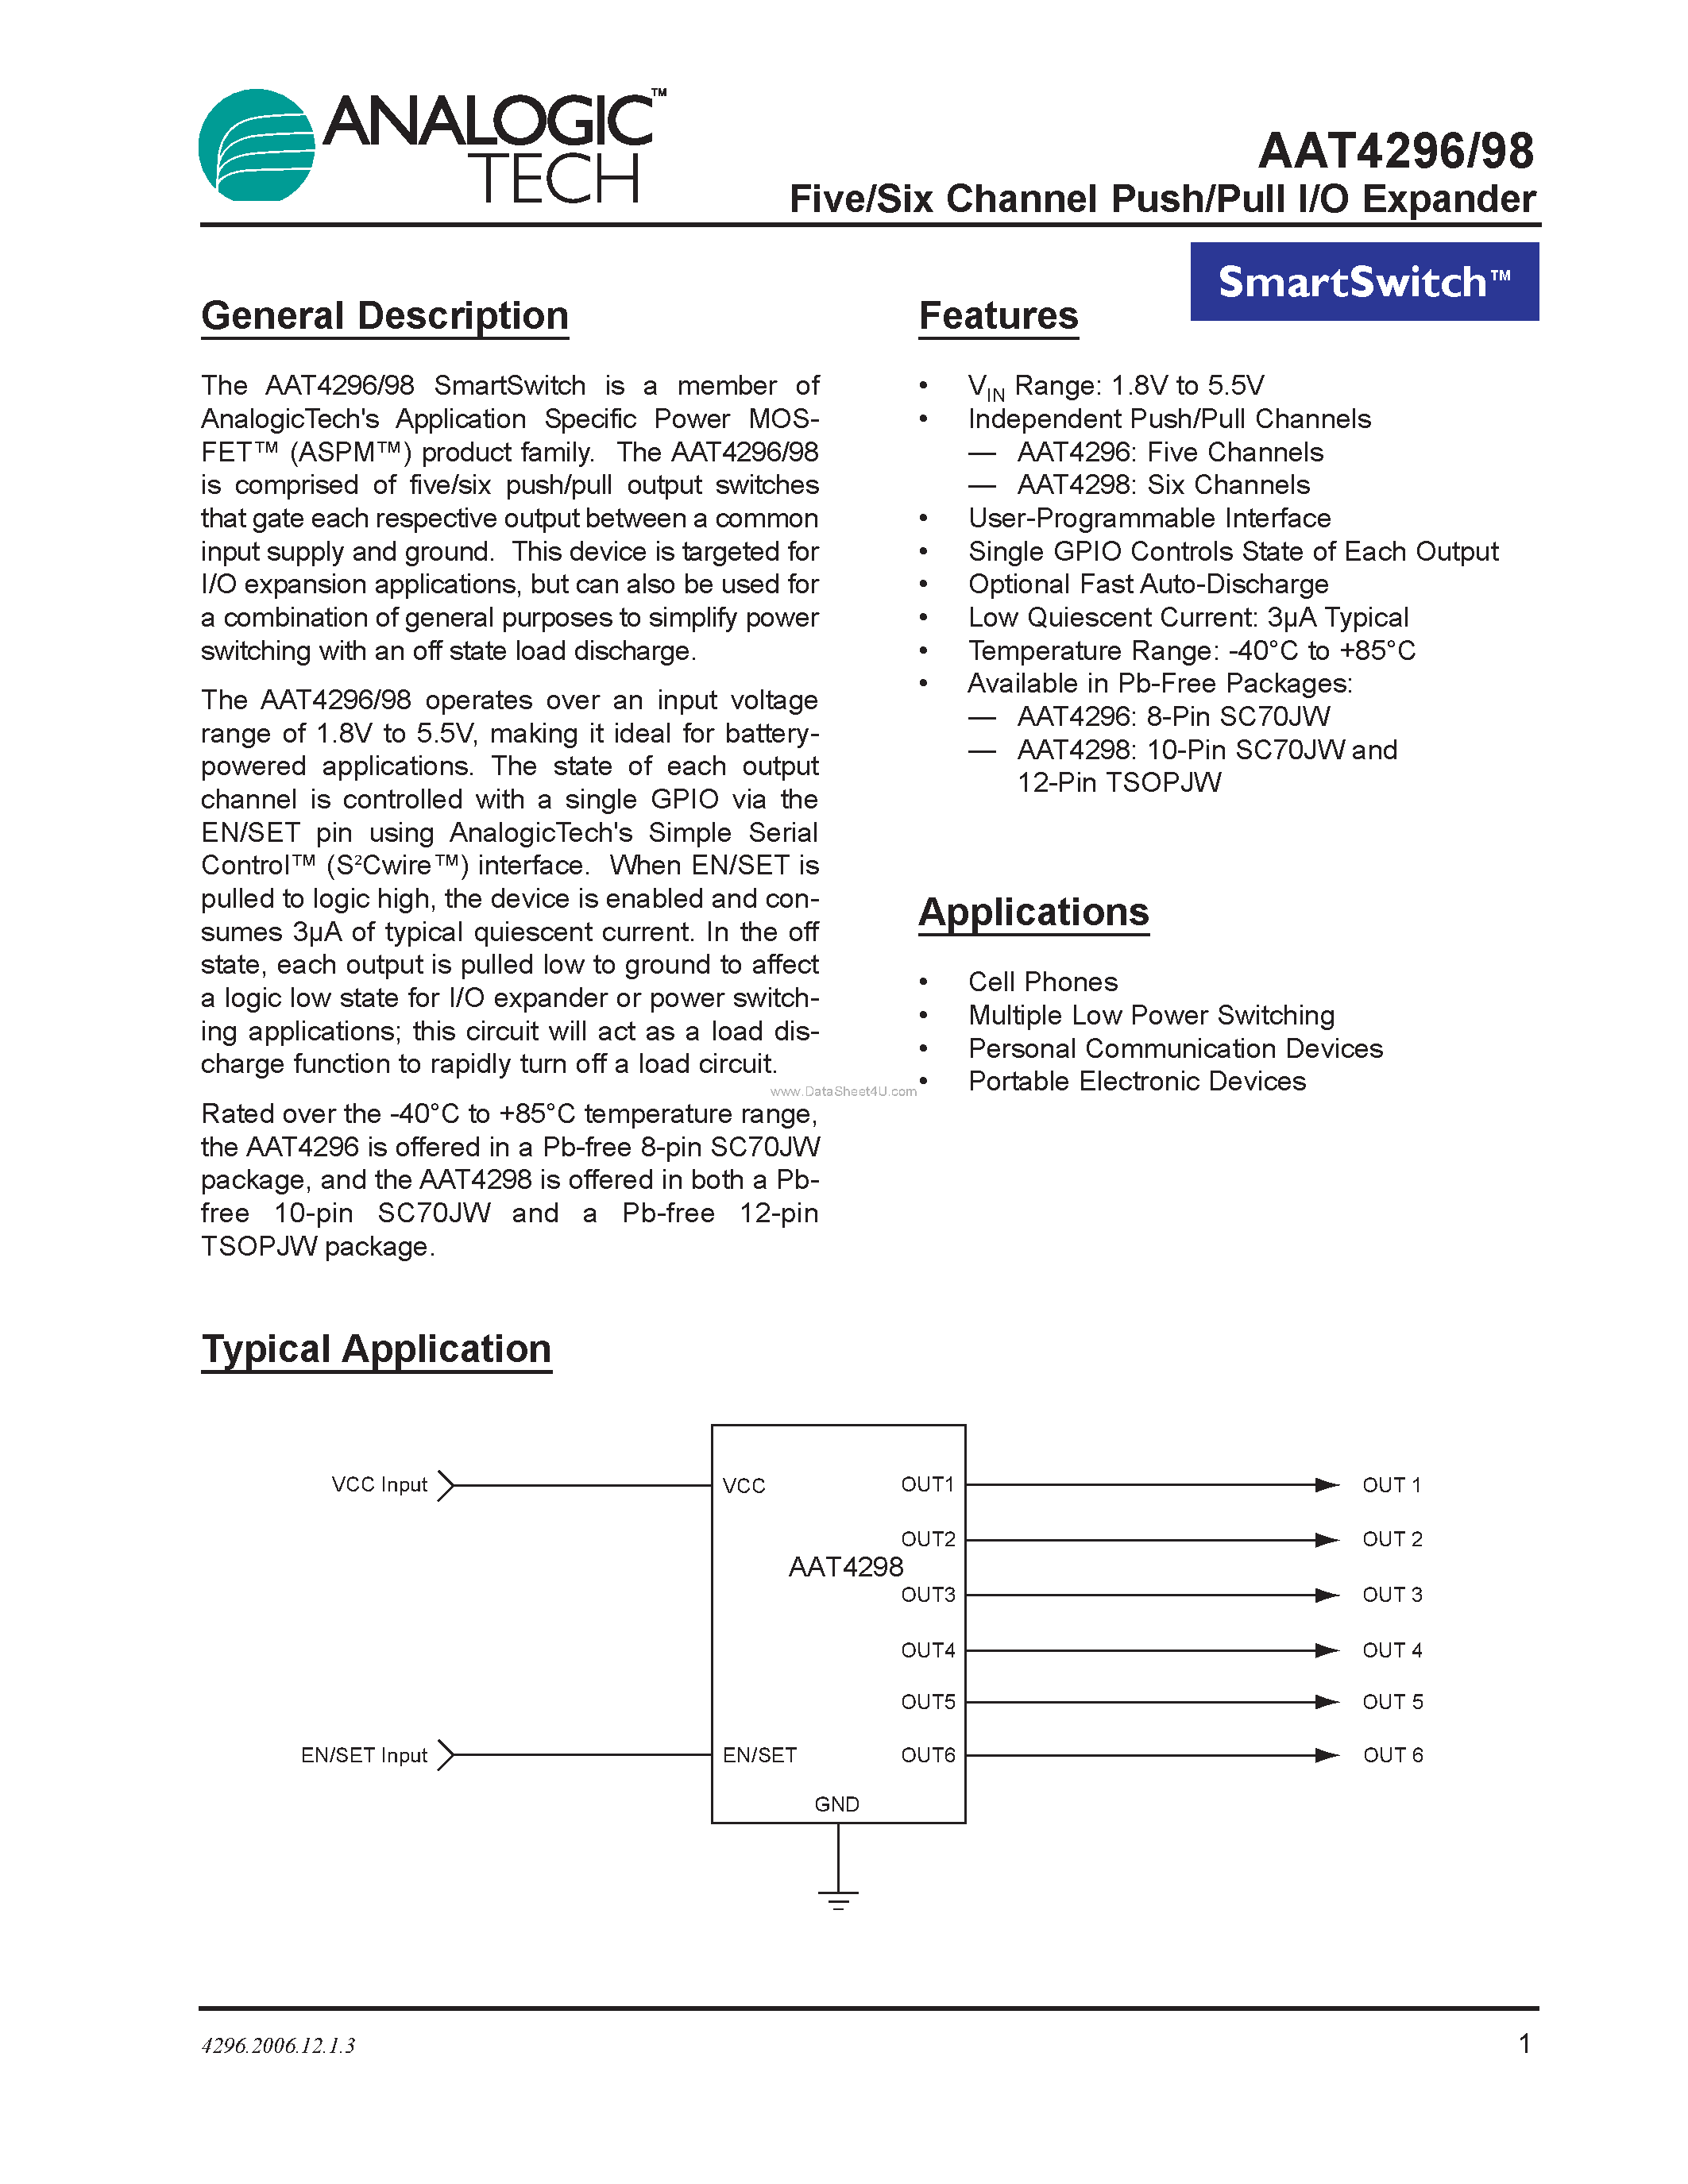 Datasheet AAT4296 - (AAT4296 / AAT4298) Five/Six Channel Push/Pull I/O Expander page 1